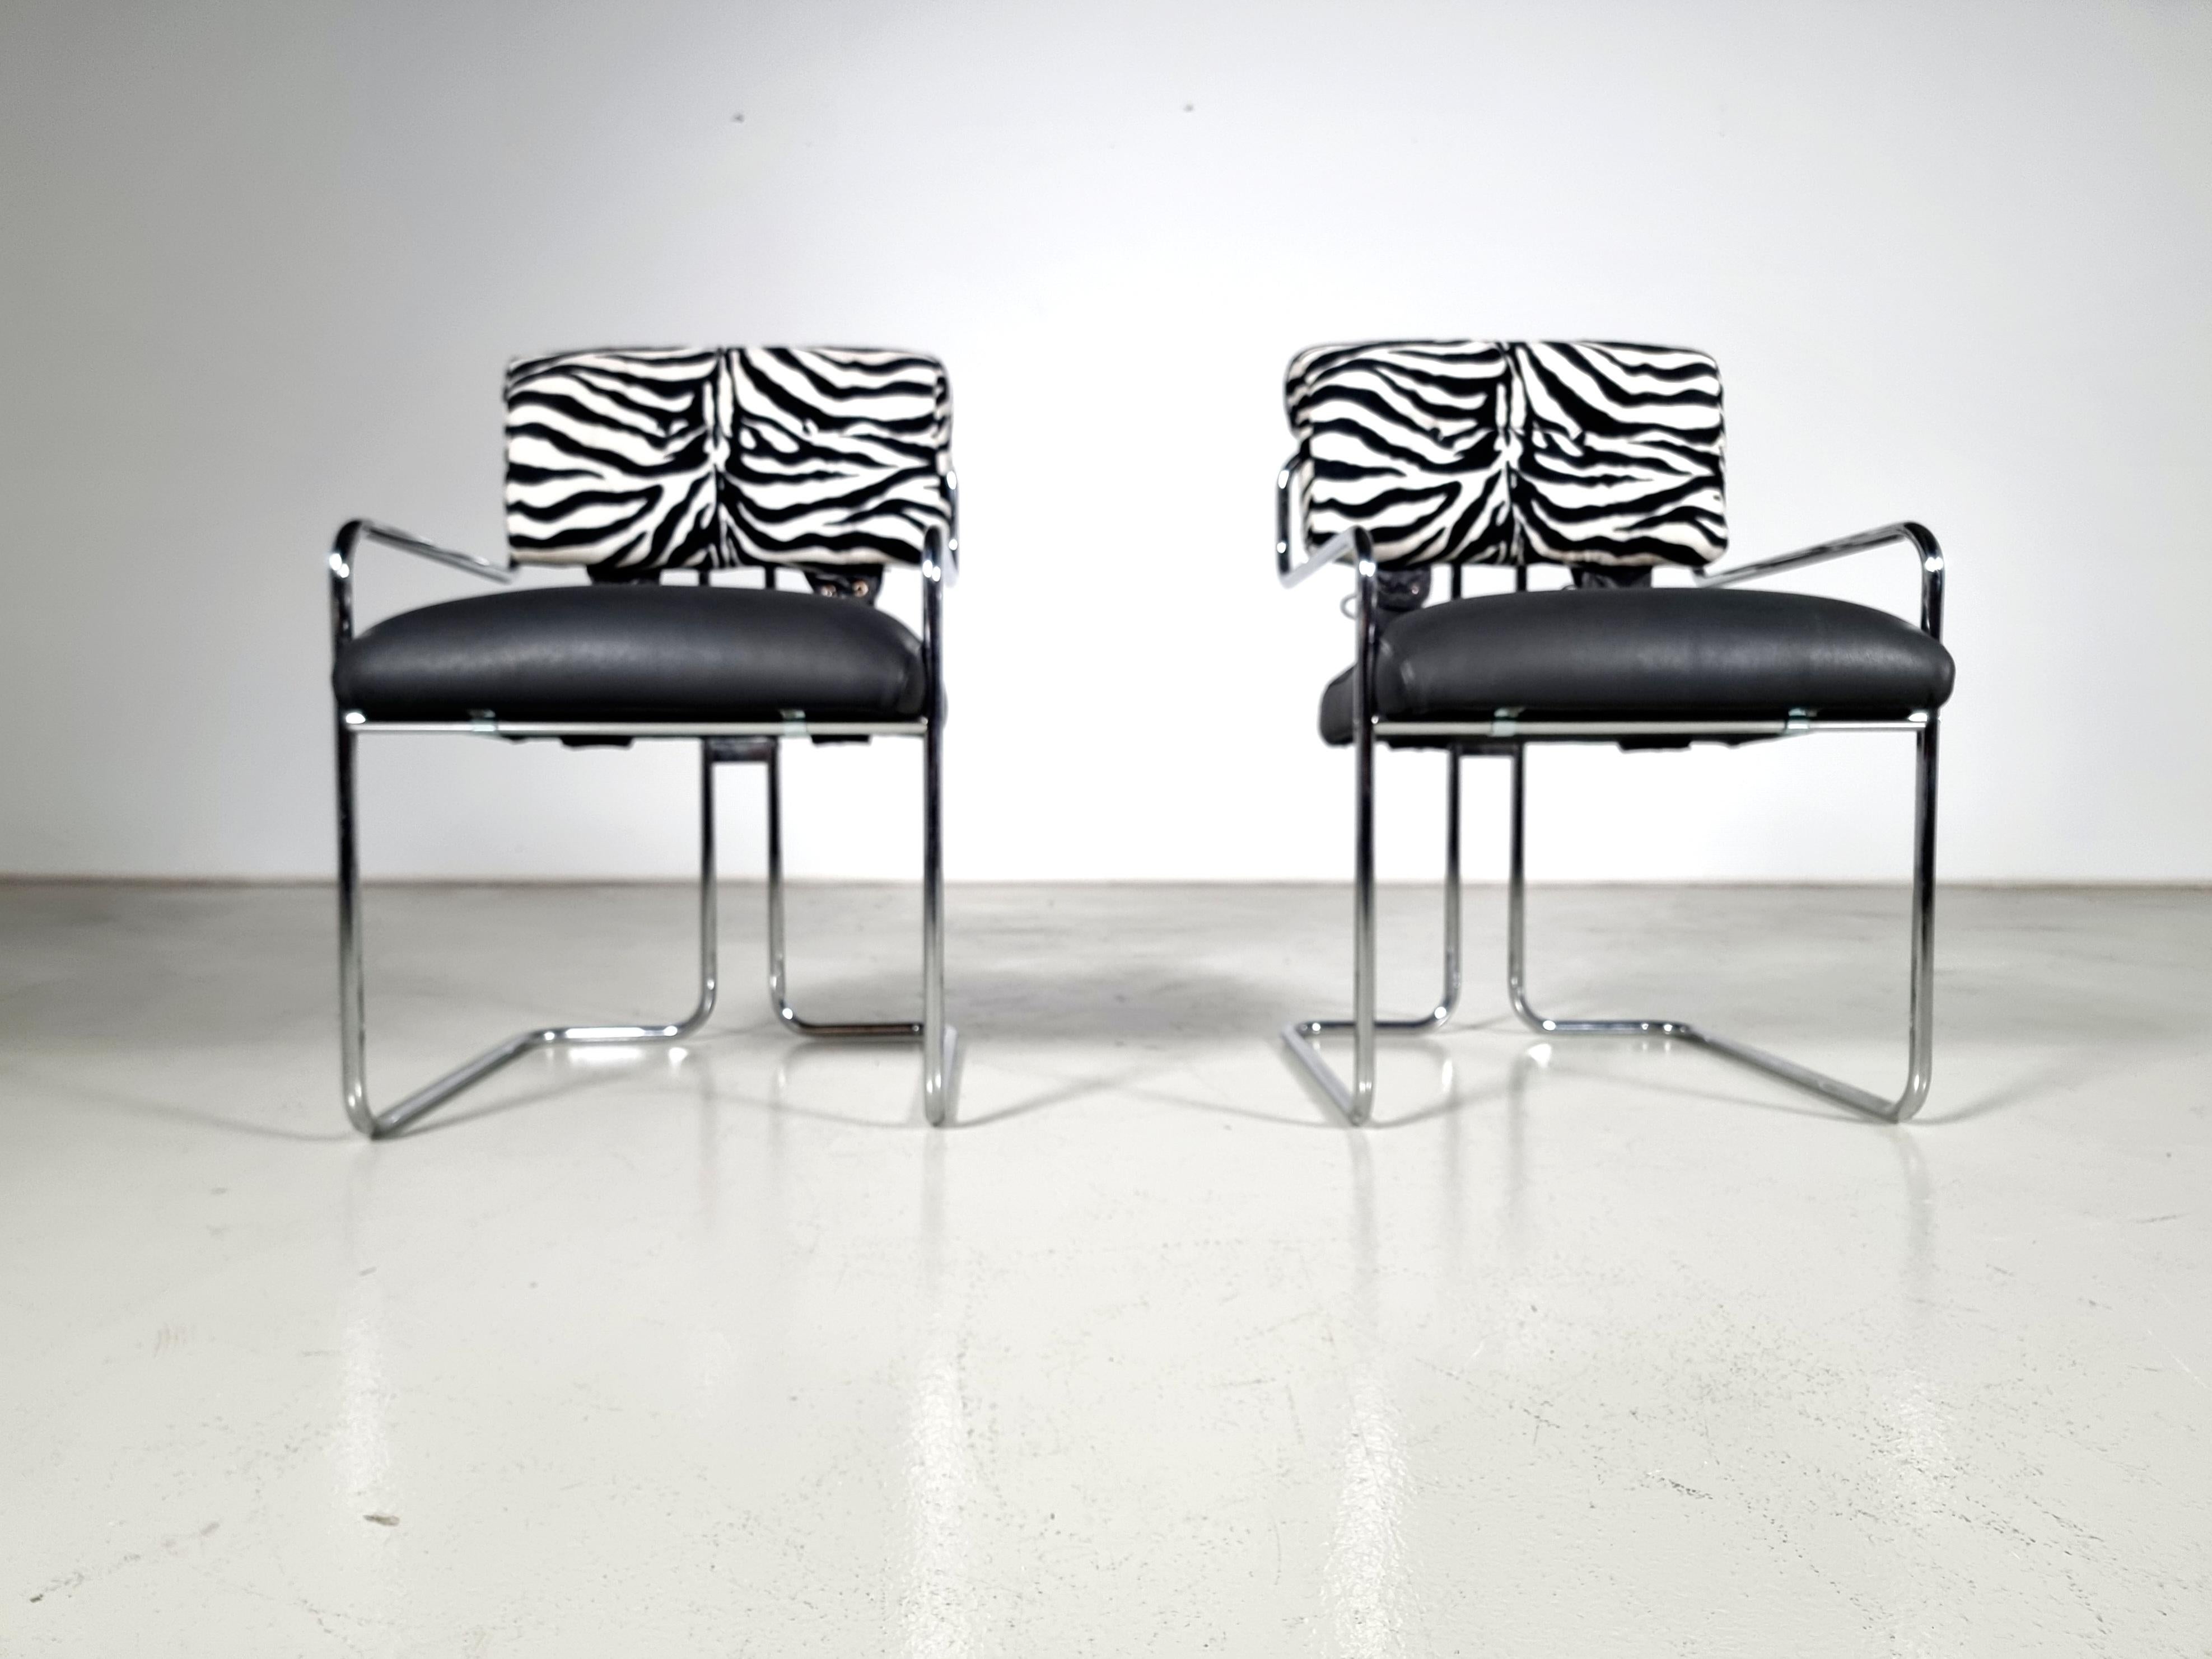 Steel Tucroma Chairs in black leather and zebra fabric, Guido Faleschini, Mariani For Sale